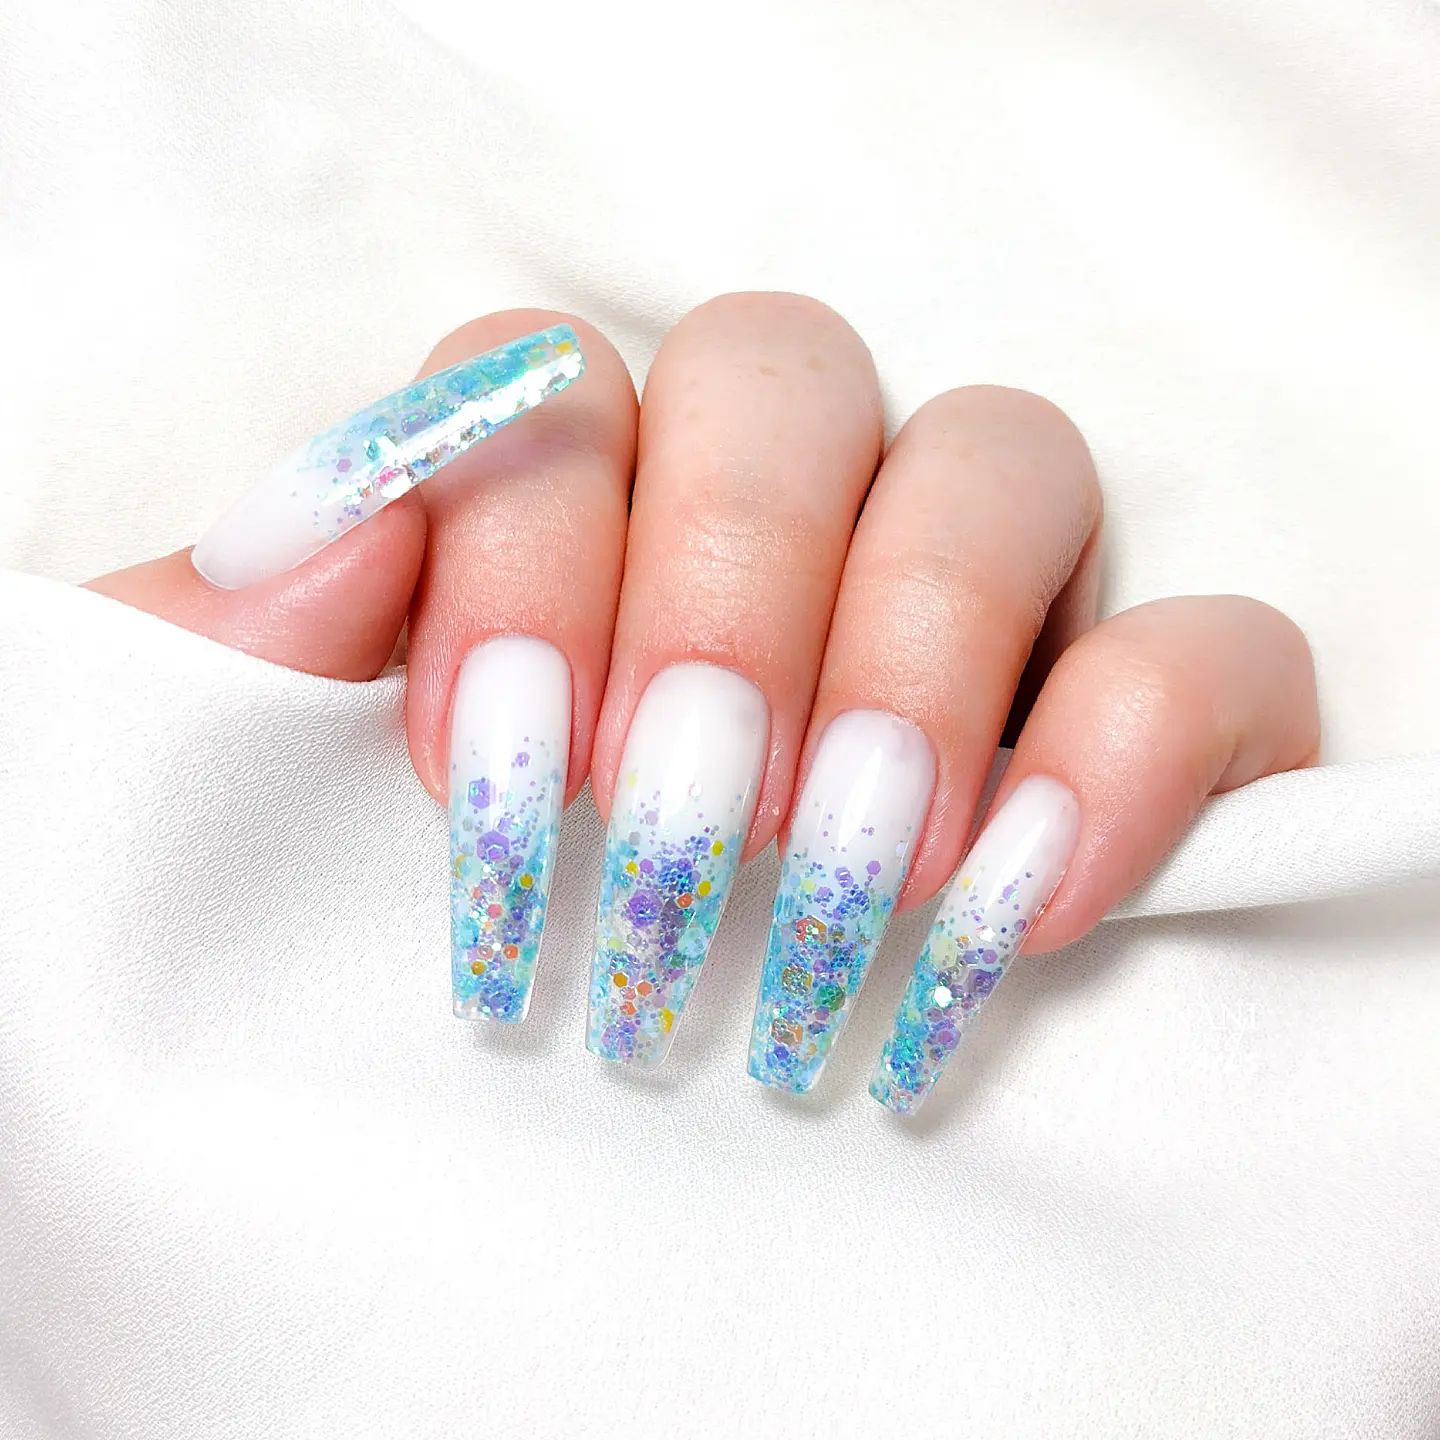 White Nails with Blue Glitter